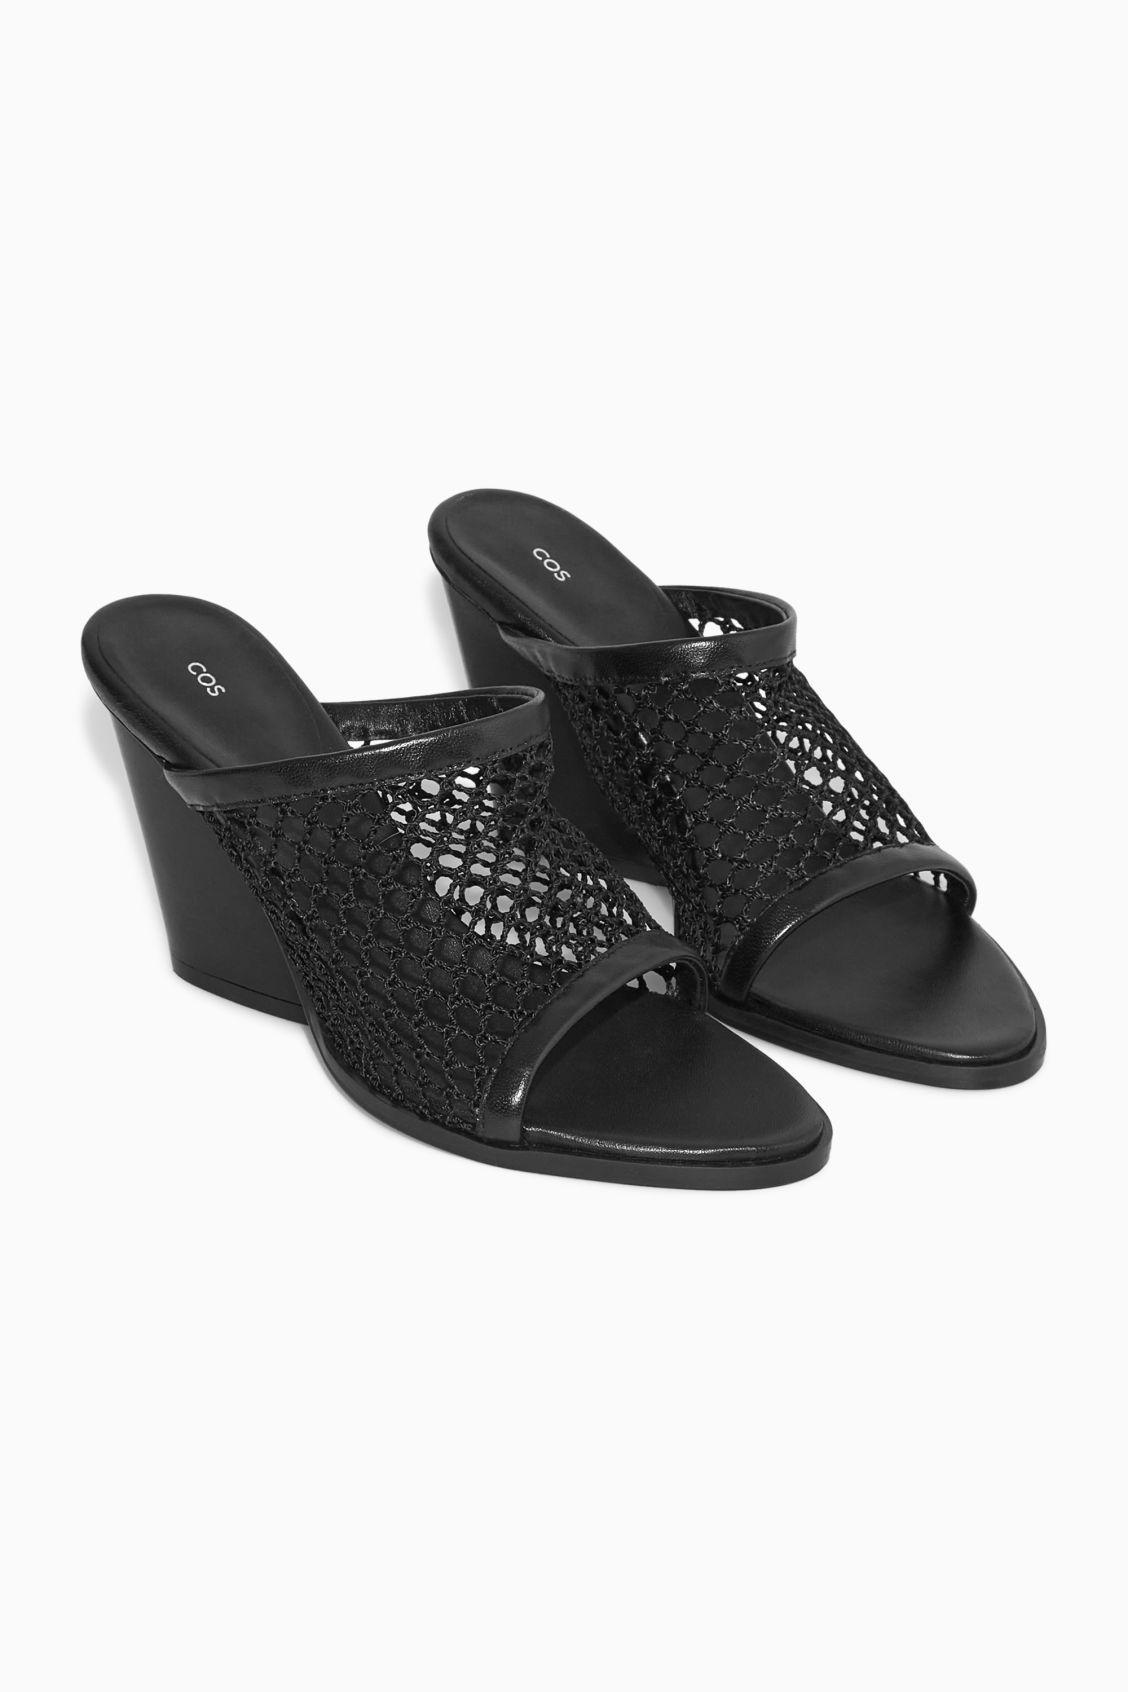 MESH WEDGE SANDALS Product Image